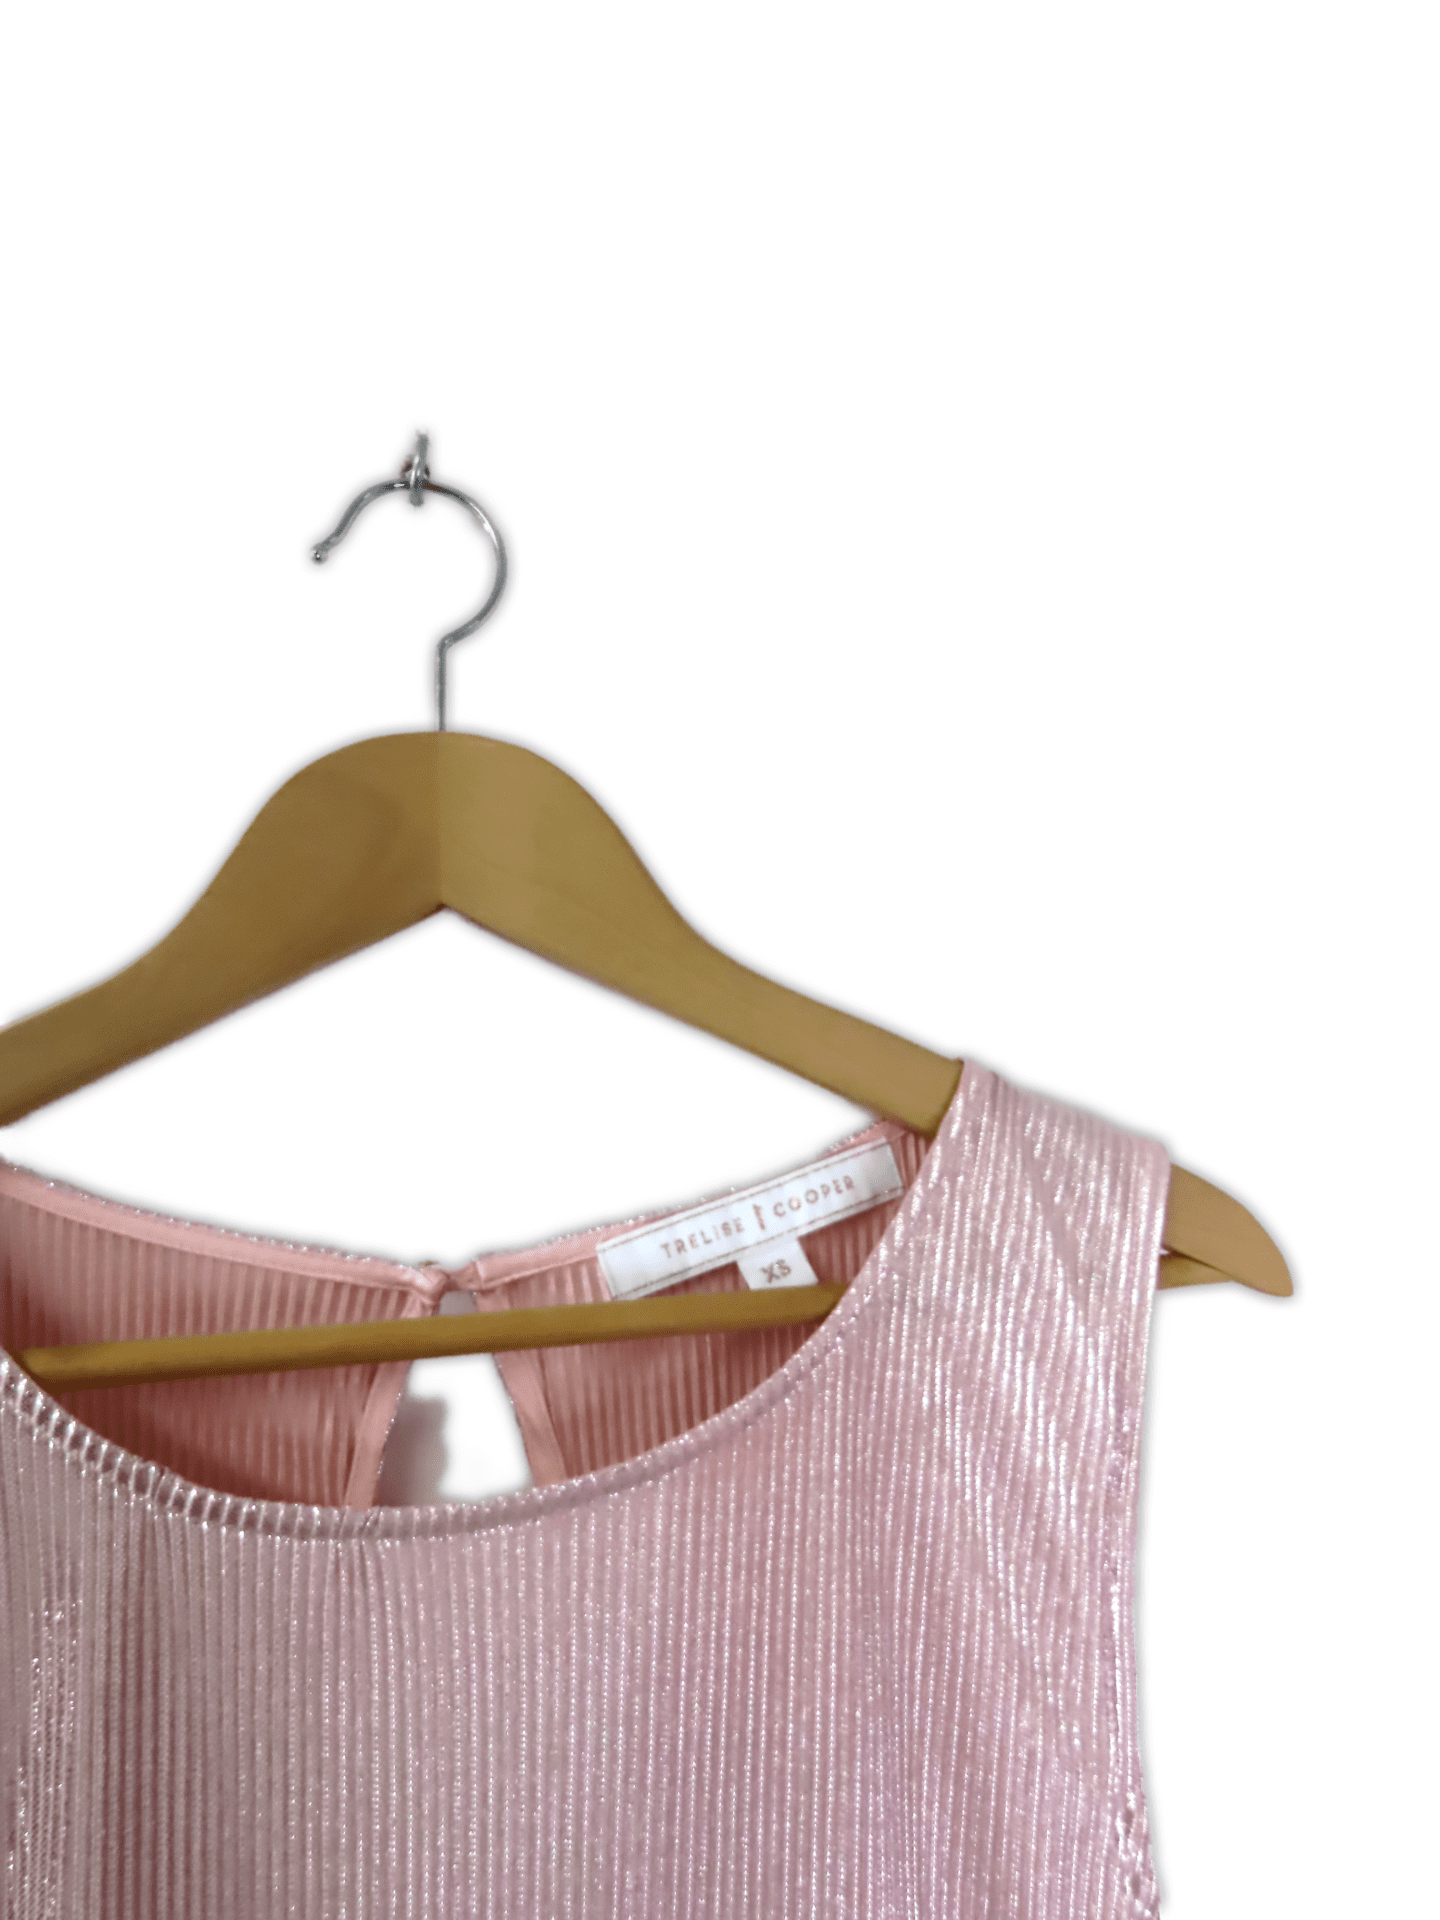 Pink Metallic dress, pleated all the way down. Light weight fabric featuring a keyhole button closure at the back and a high neckline at the front.